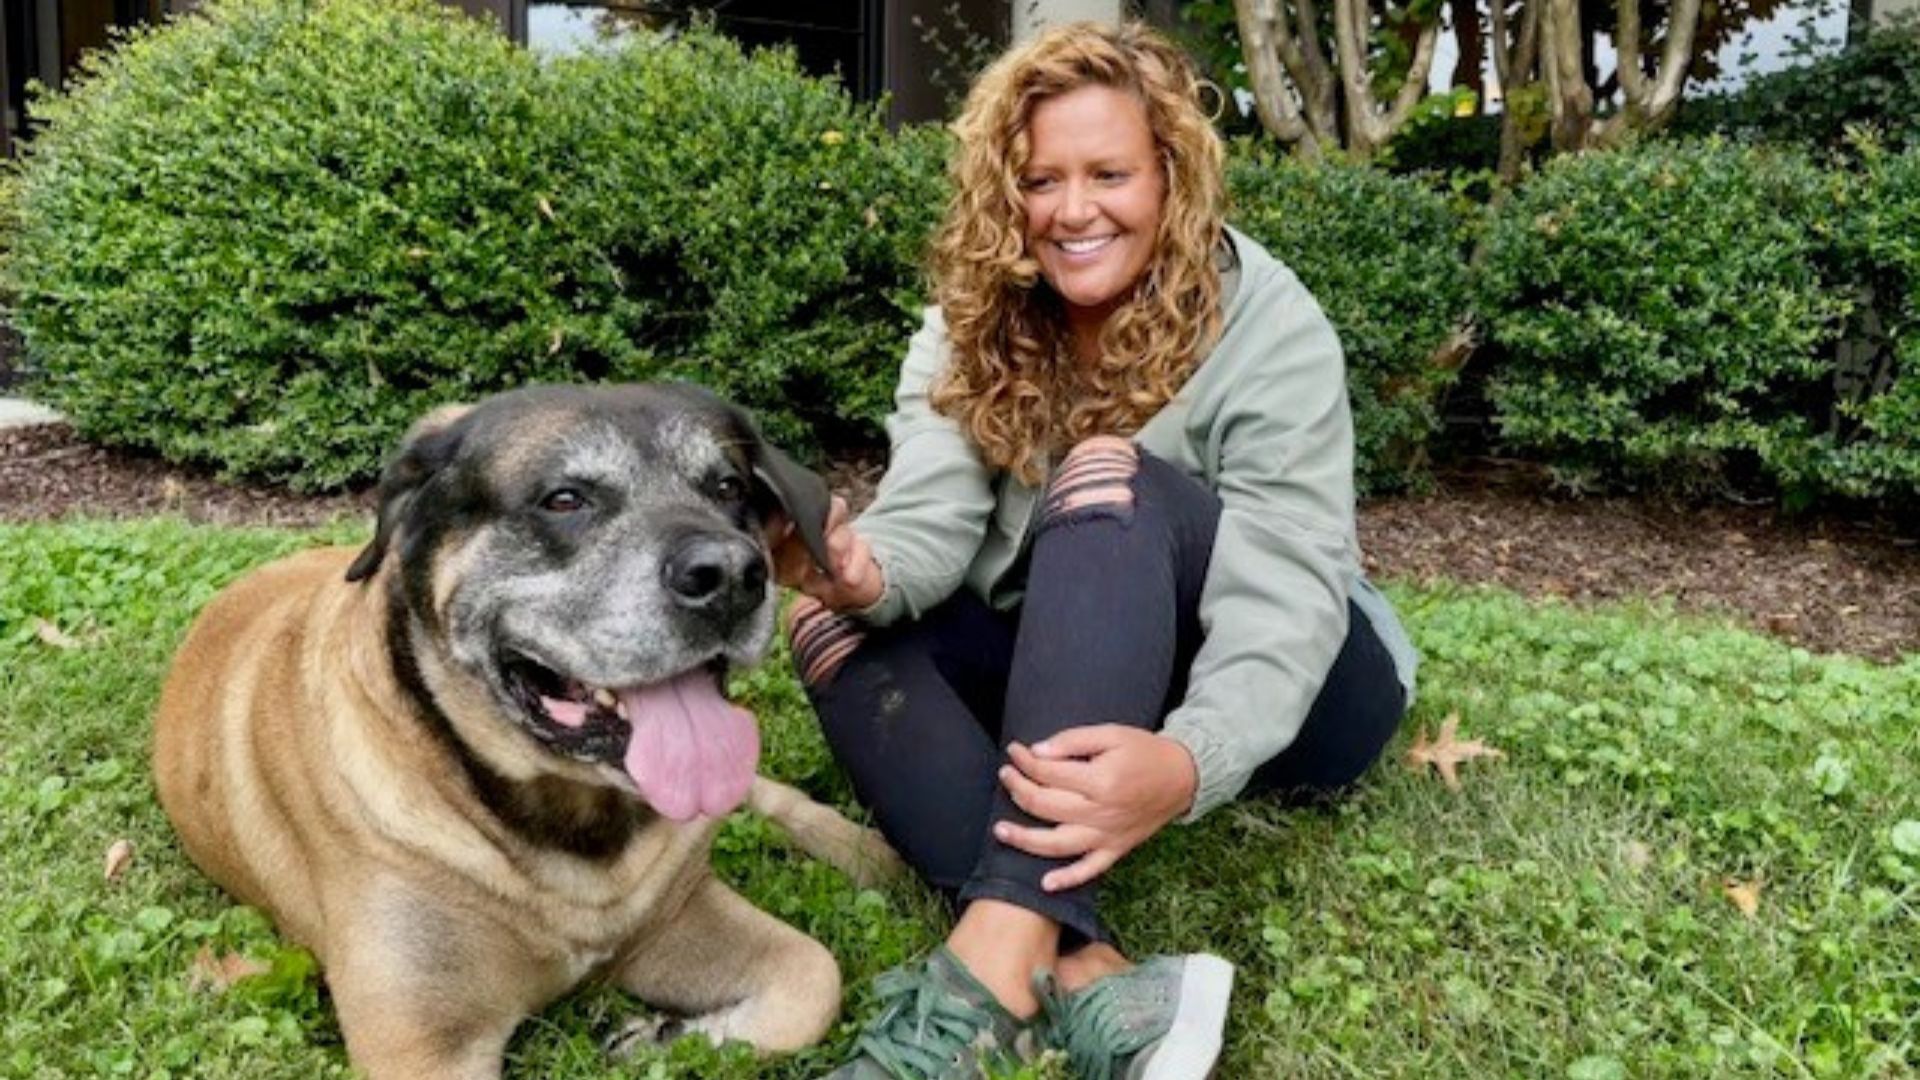 Jill Rainford sits on a patch of grass with an English Mastiff named Samson, who is laying down.